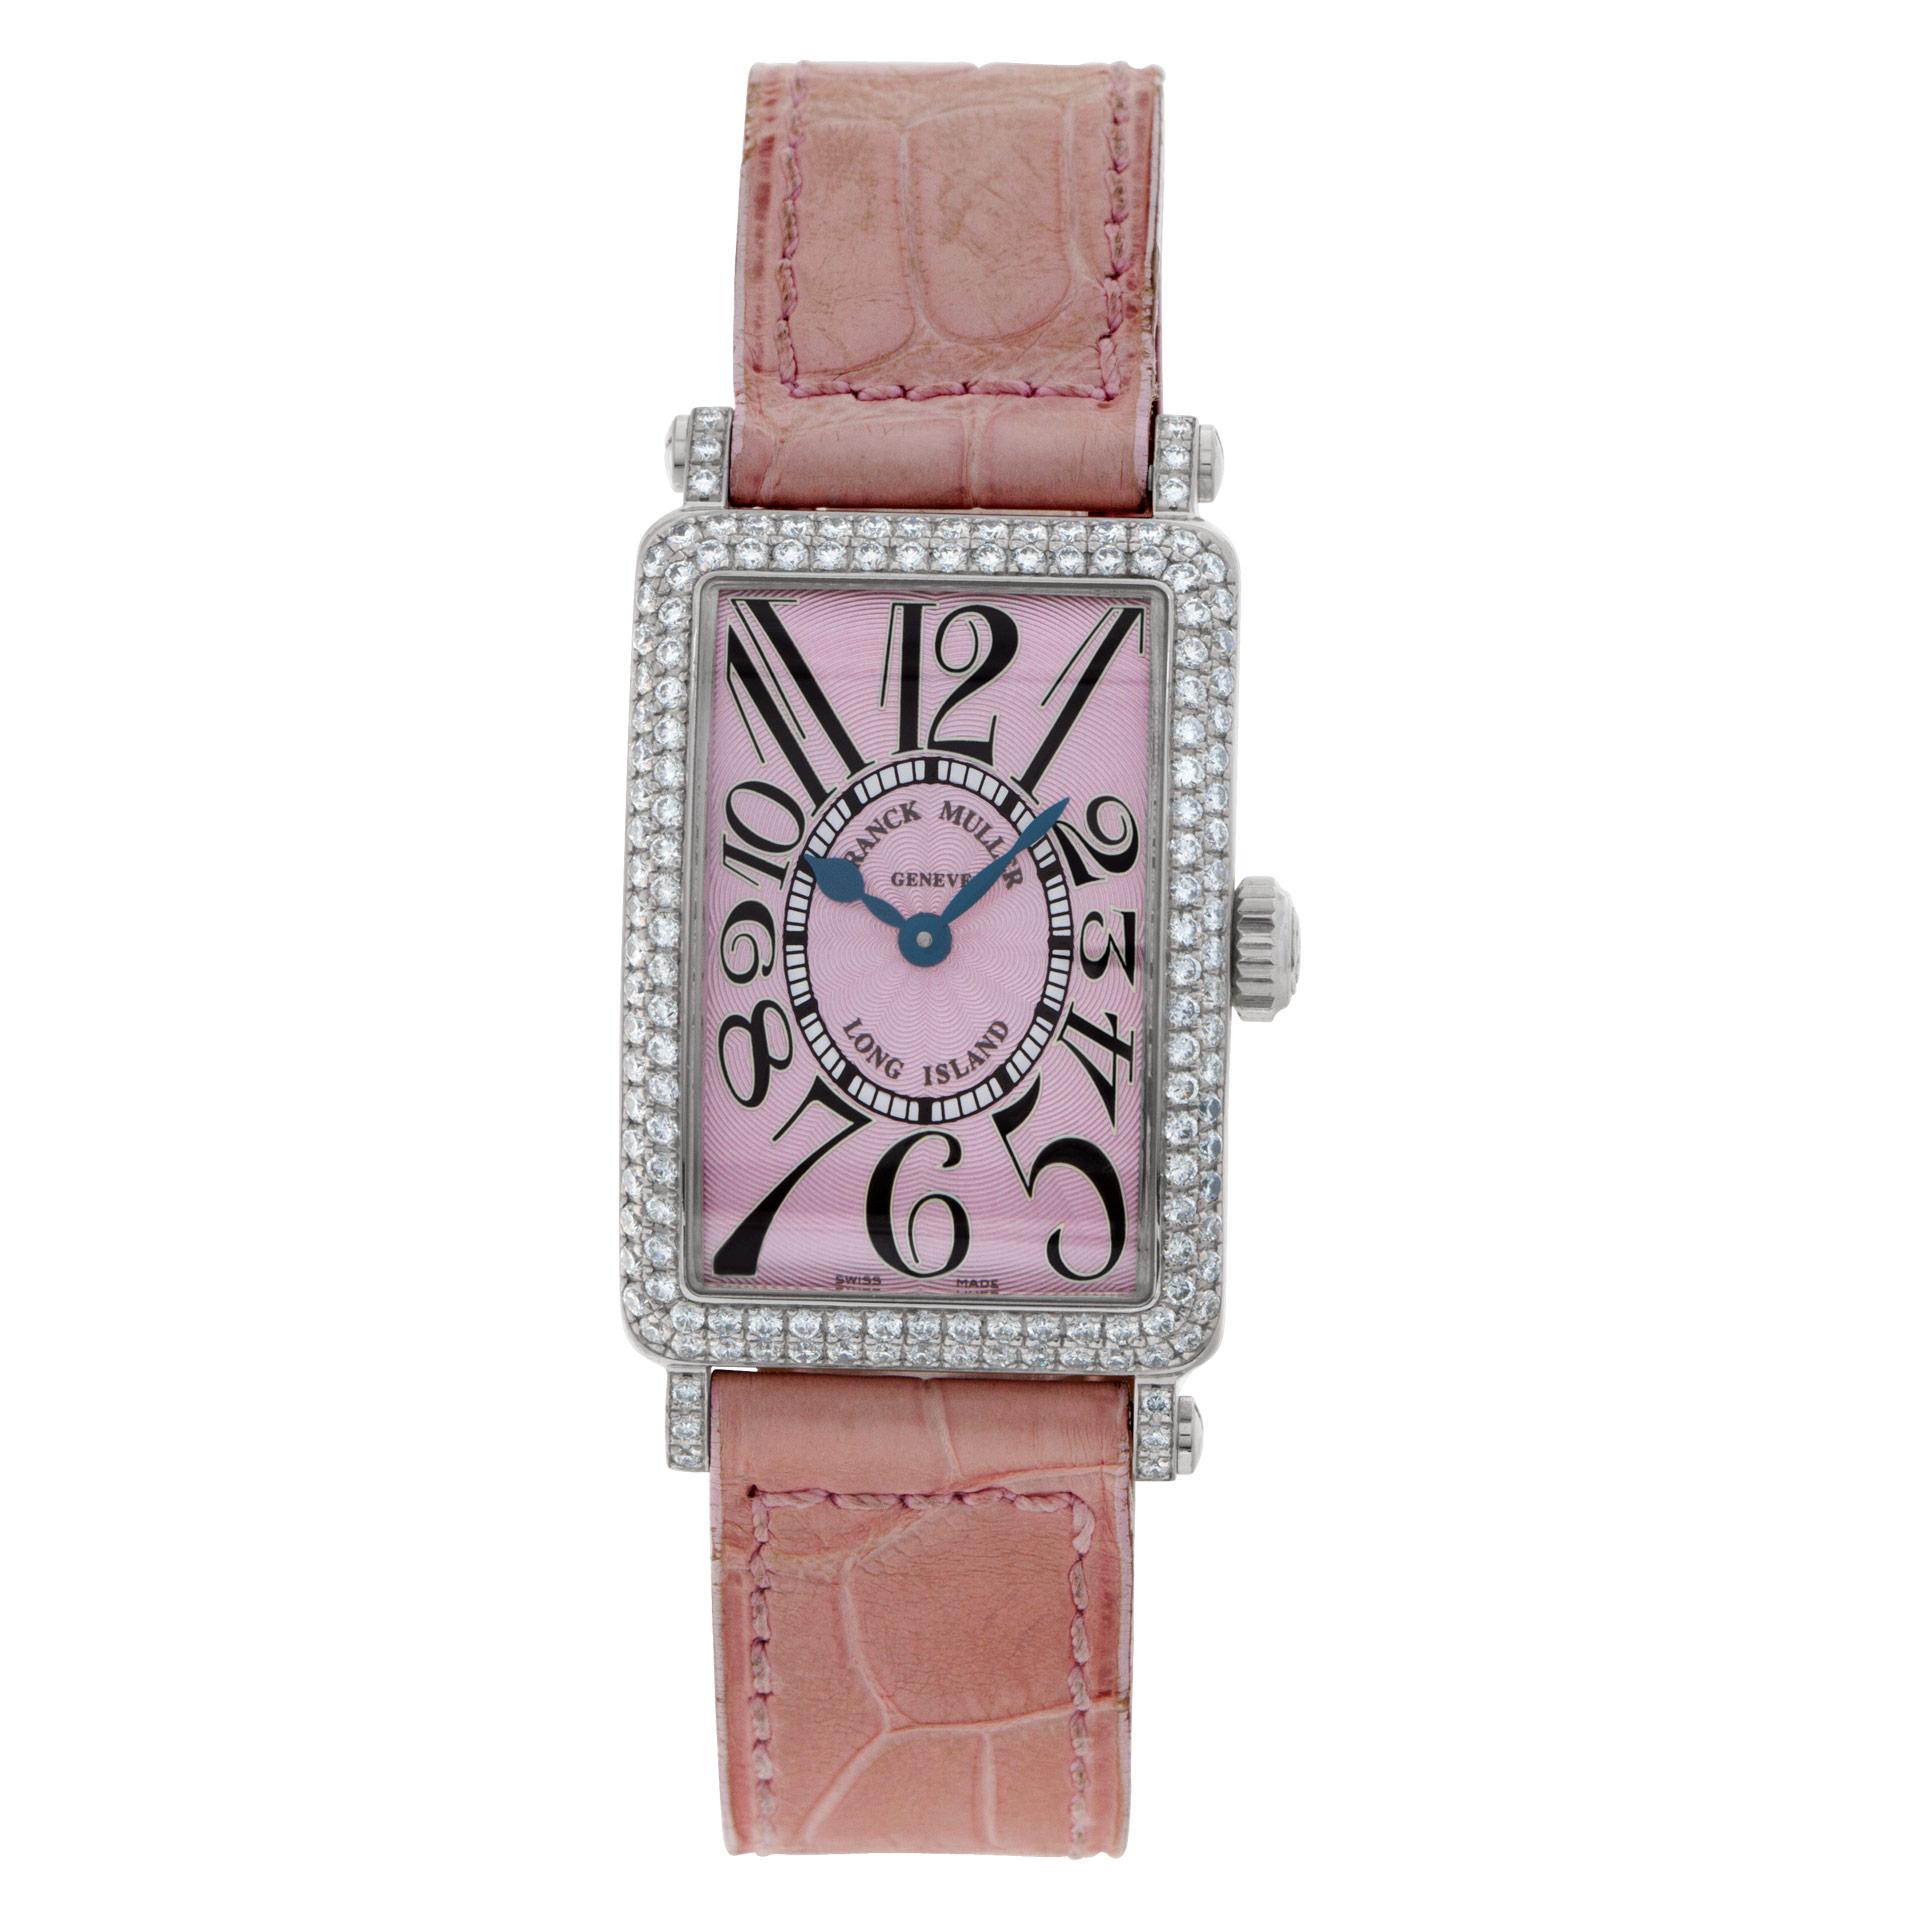 ESTIMATED RETAIL: $21,500 YOUR PRICE: $12,500 - Franck Muller Long Island Master of Complications with pink guilloche dial, 2-row diamond bezel, and diamond lugs 18k white gold on leather strap with 18k white gold tang buckle with diamond accents.